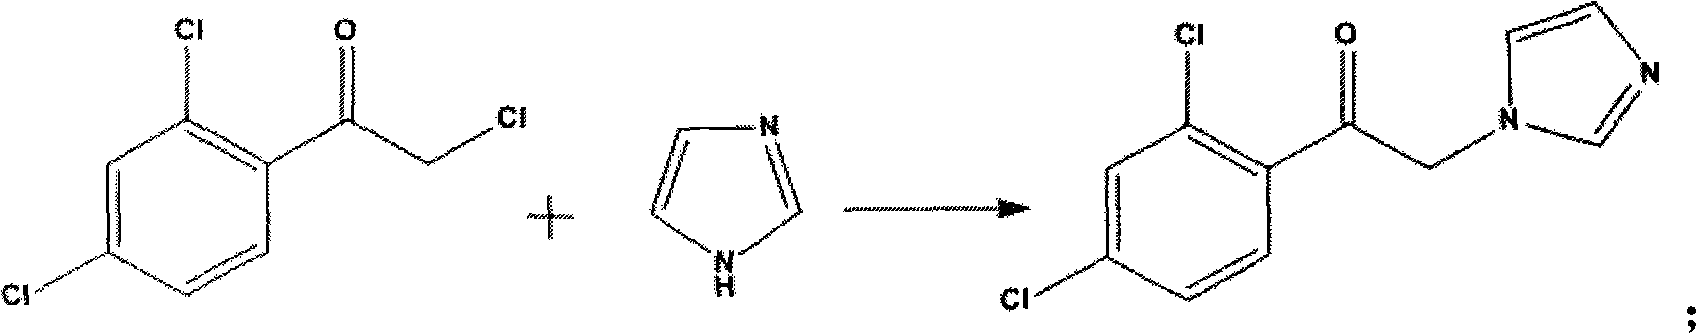 Method for producing miconazole nitrate on industrialized basis